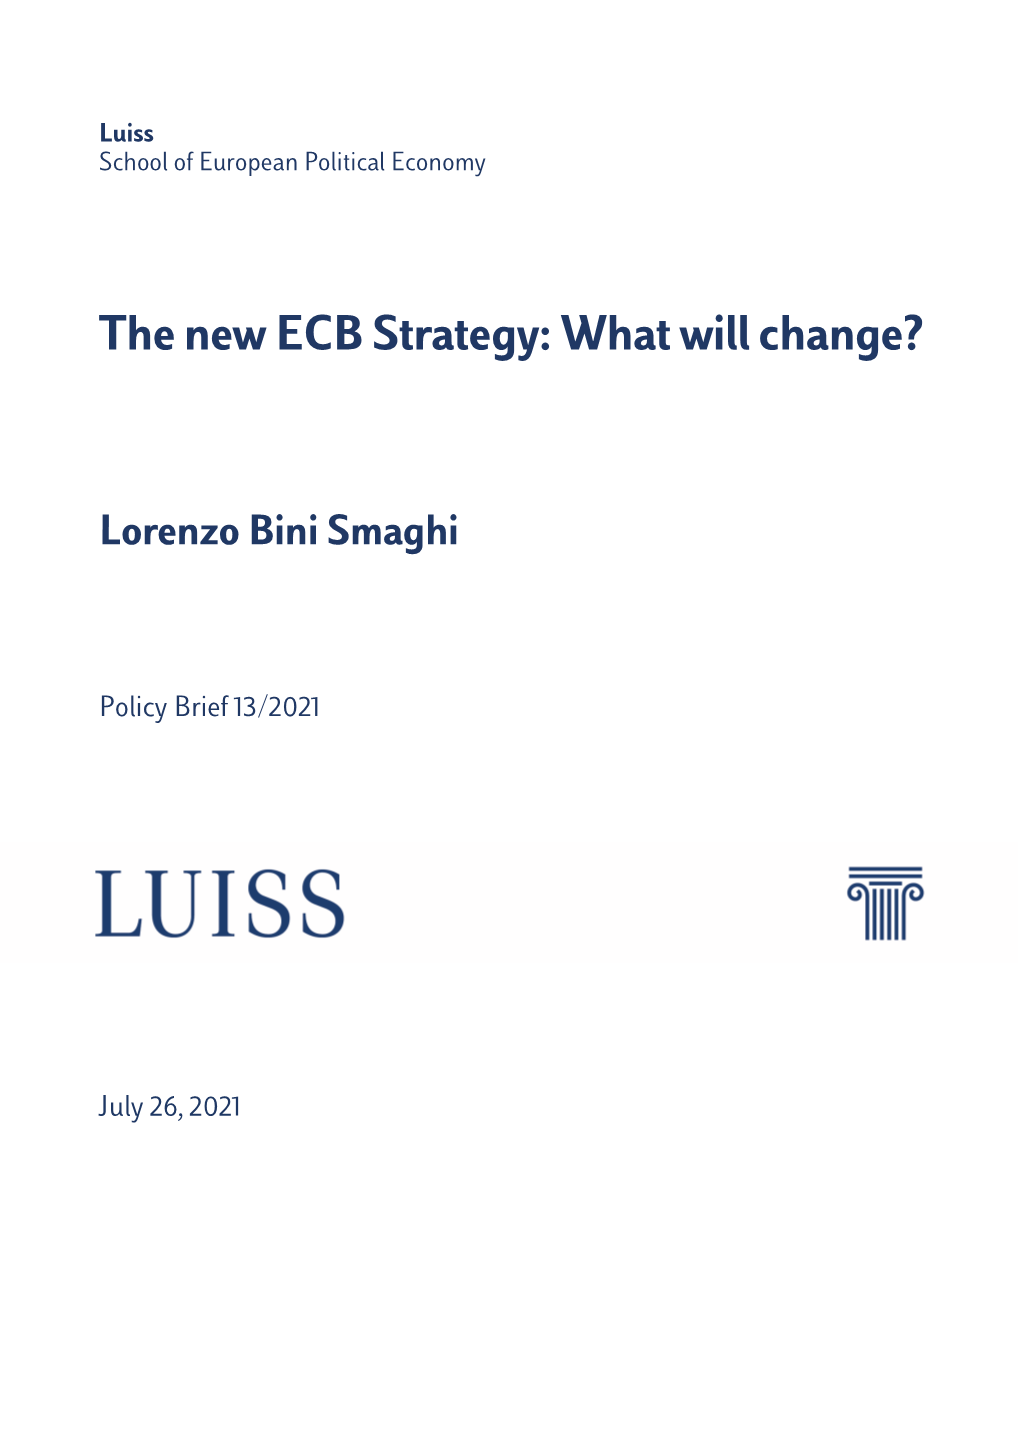 The New ECB Strategy: What Will Change?